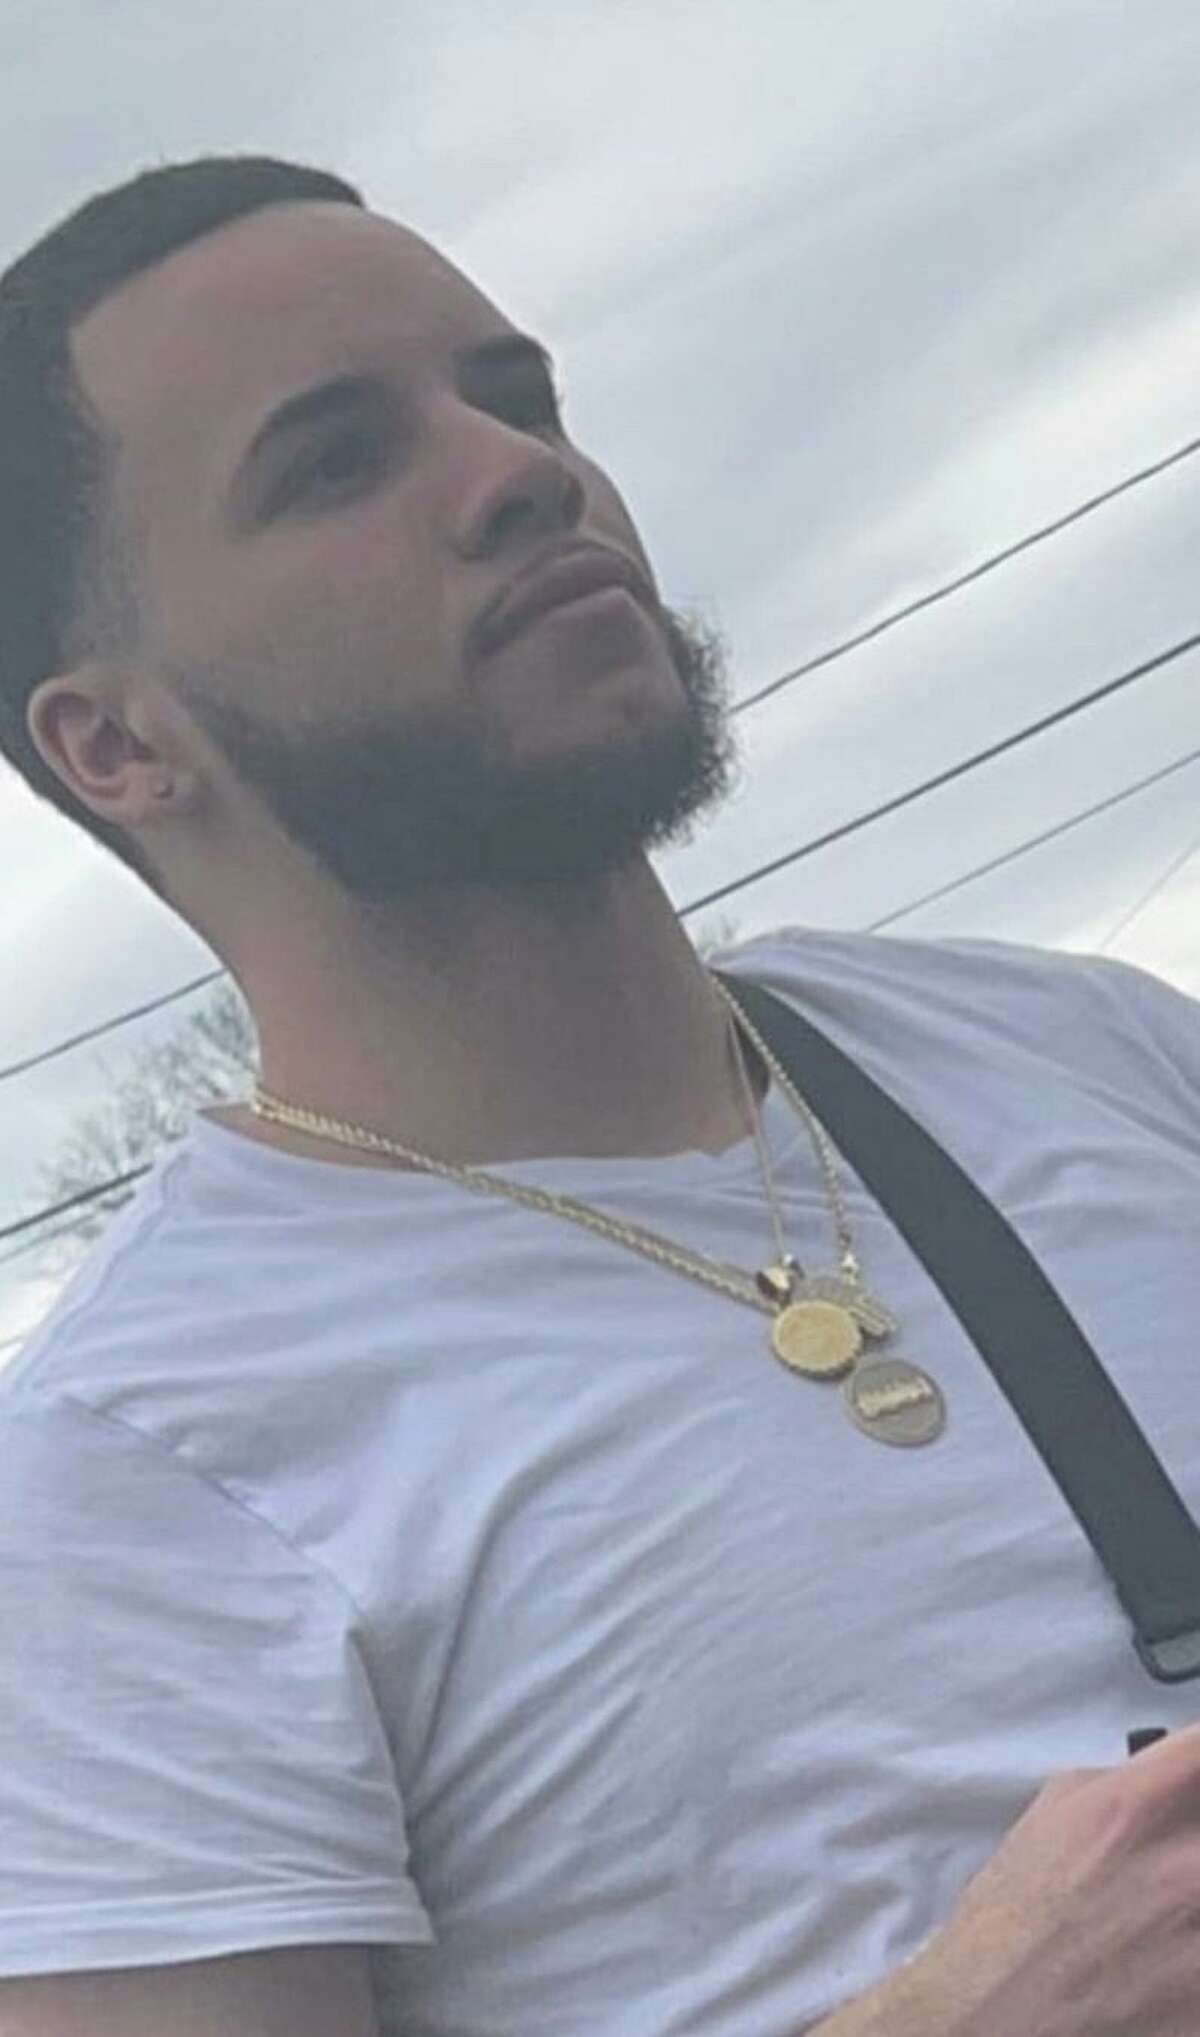 Carlos Reyes, 20, of Danbury, was last seen by family members on Monday. His vehicle was found unoccupied Thursday in Brewster, N.Y.